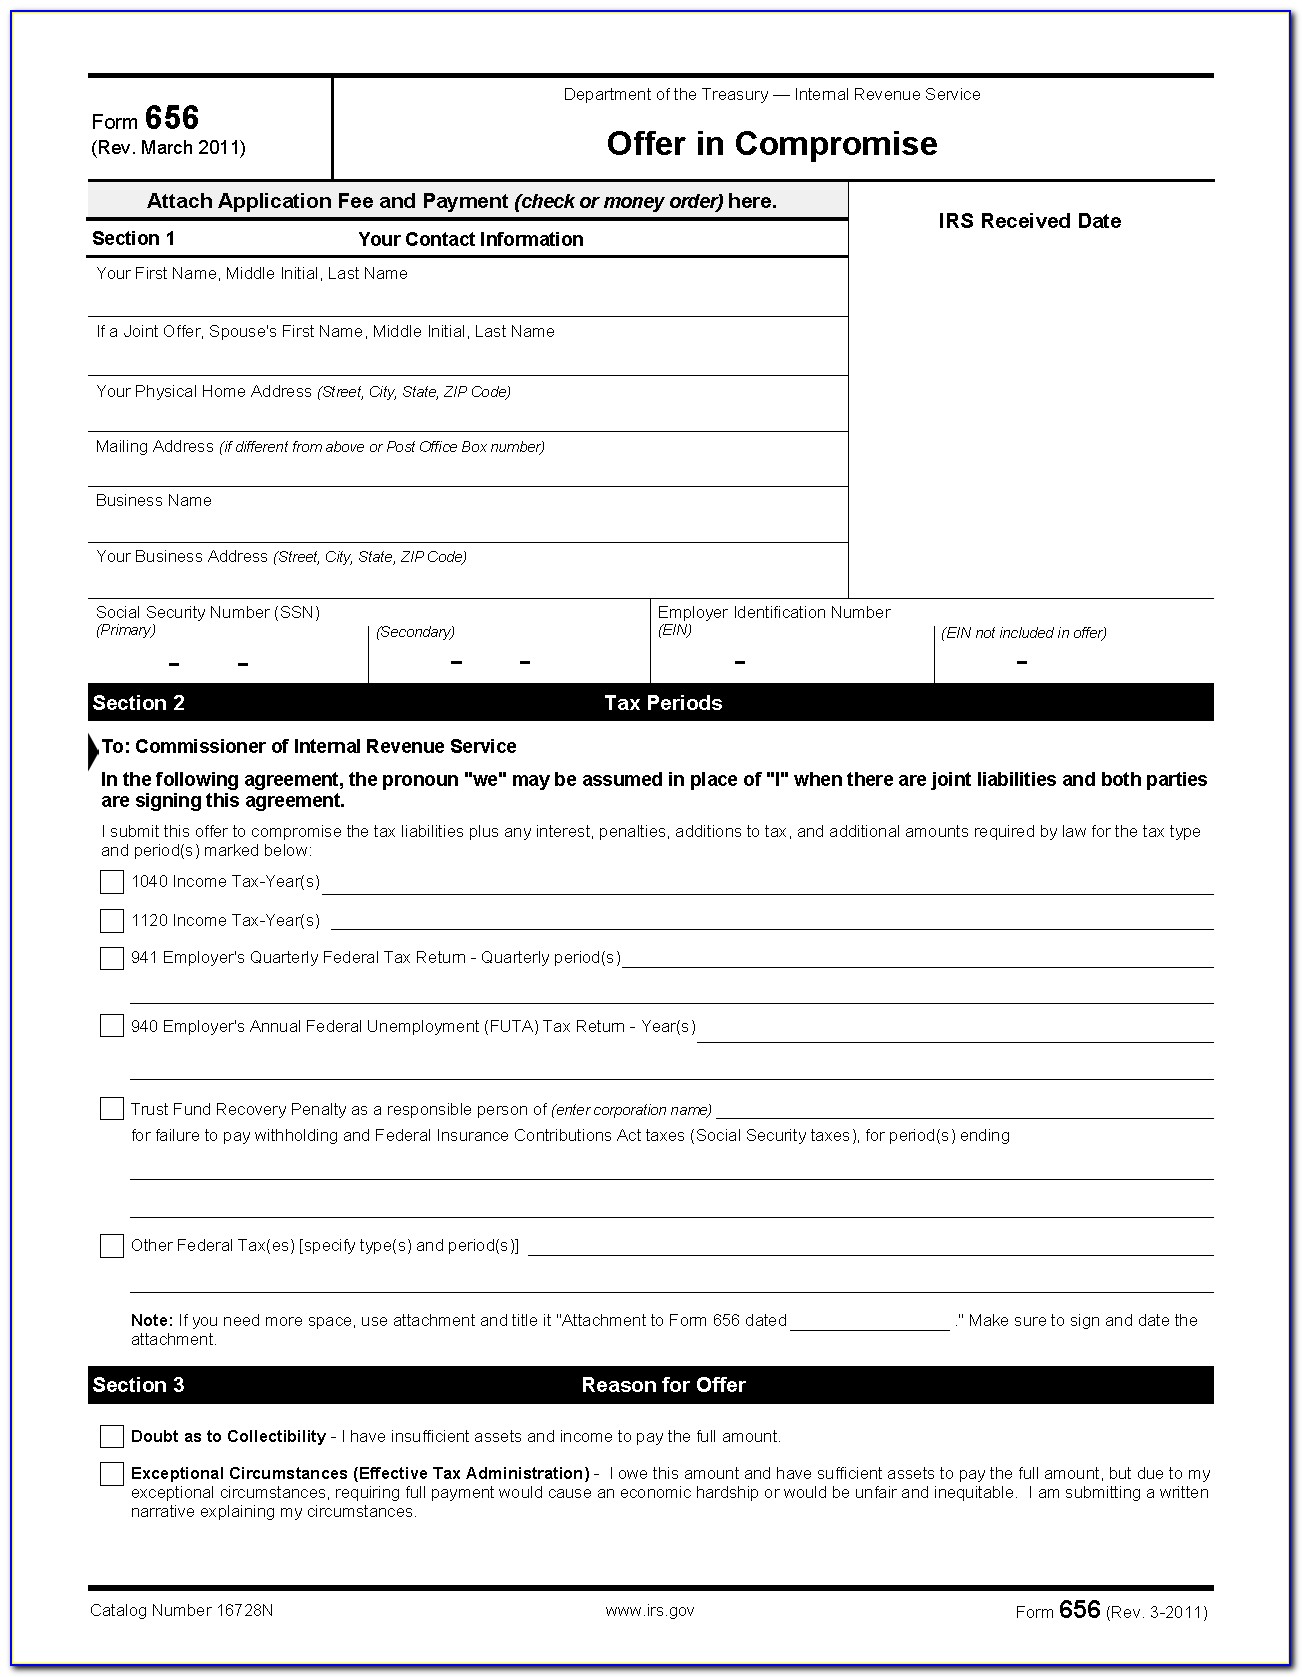 Irs Offer Compromise Form 656